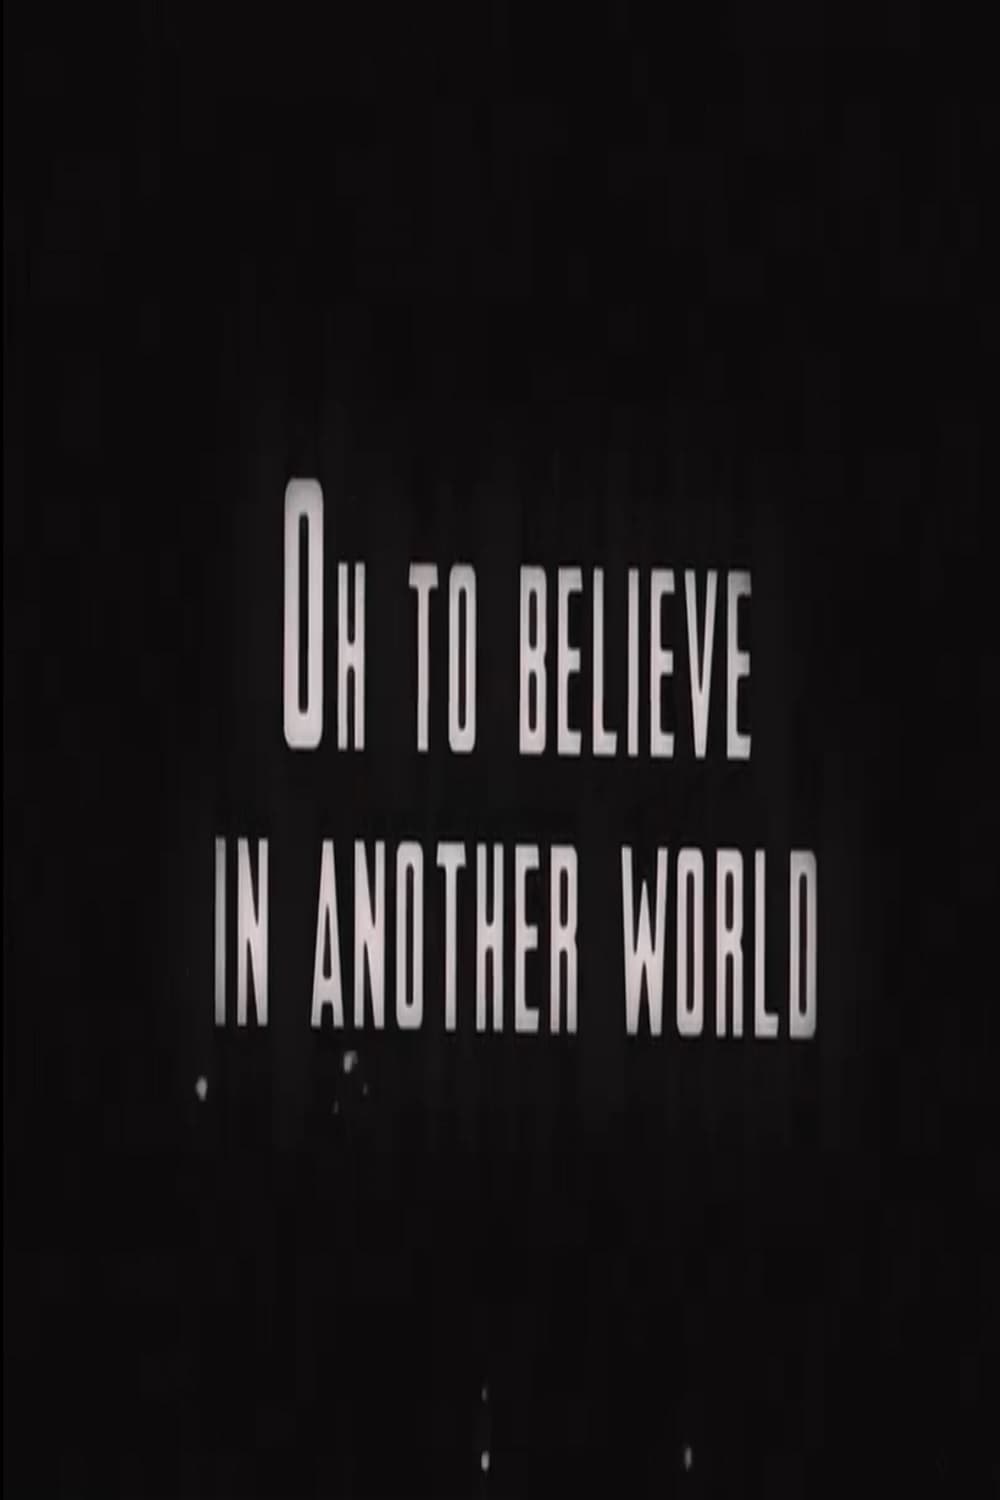 Oh To Believe in Another World